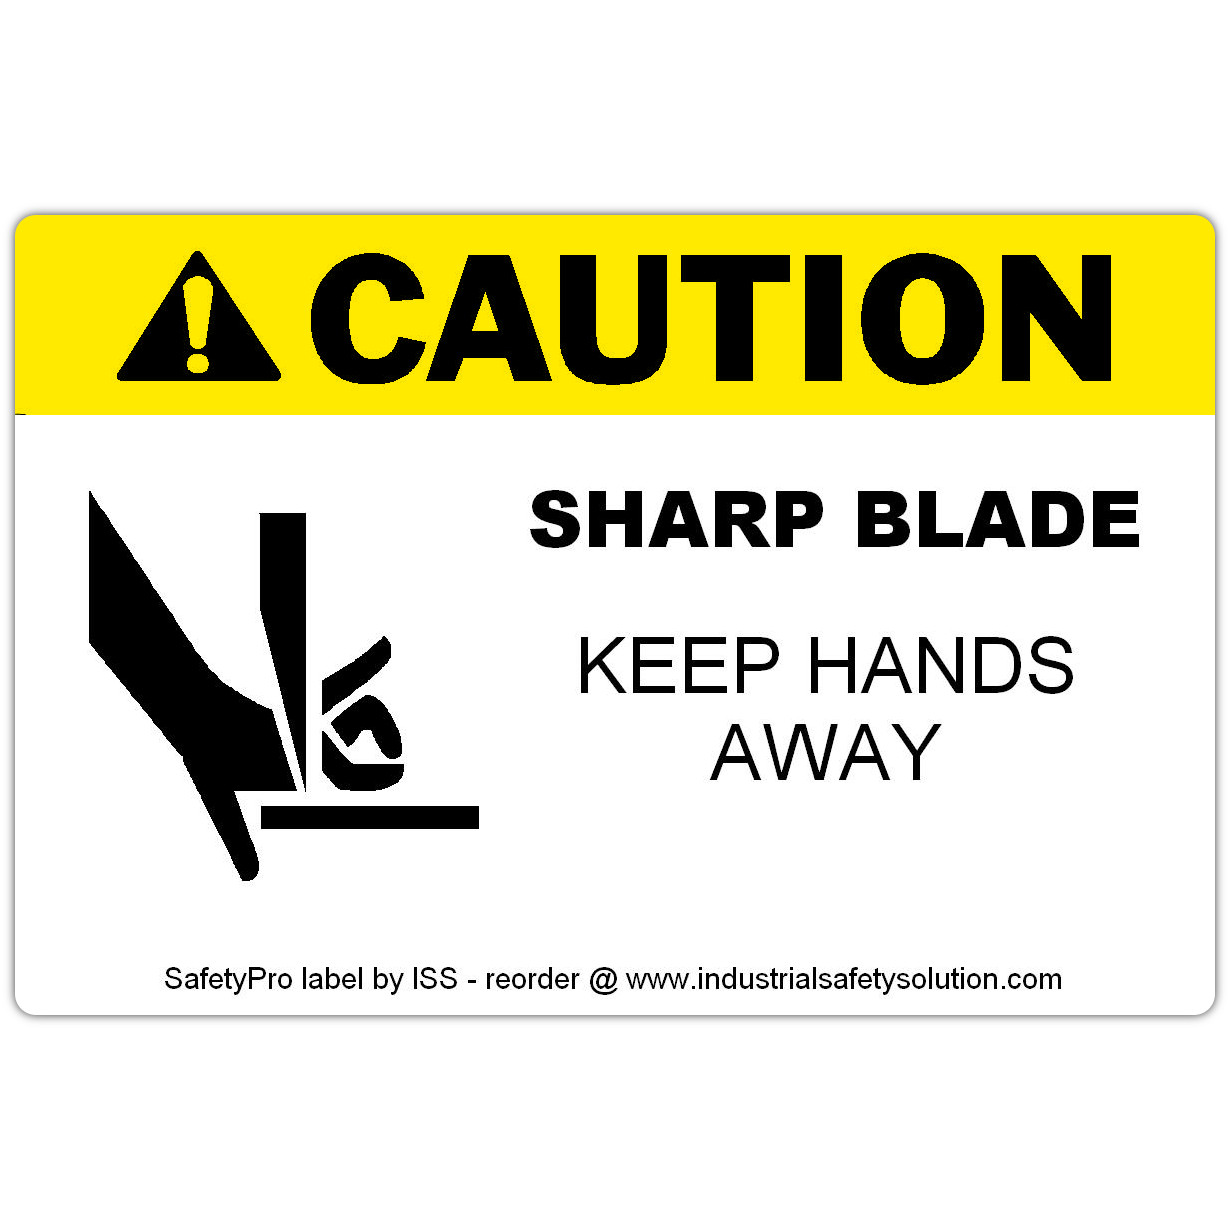 Detail view for 4" x 6" CAUTION Sharp Blade Safety Label